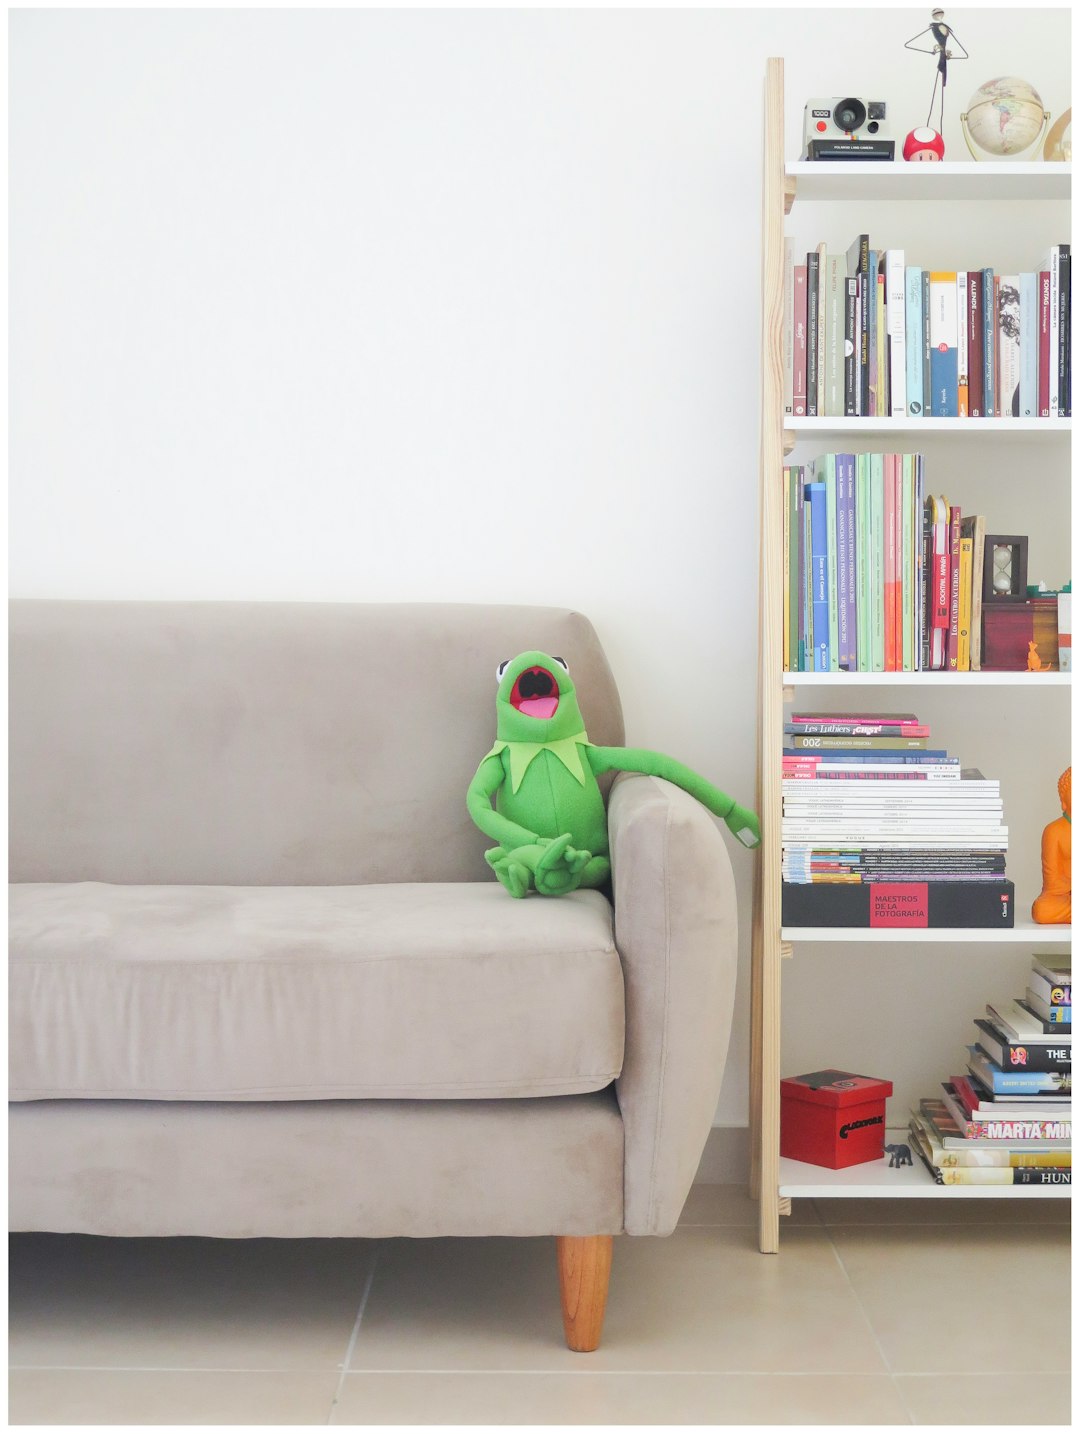  the muppets kermit plush toy on gray sofa bookcase